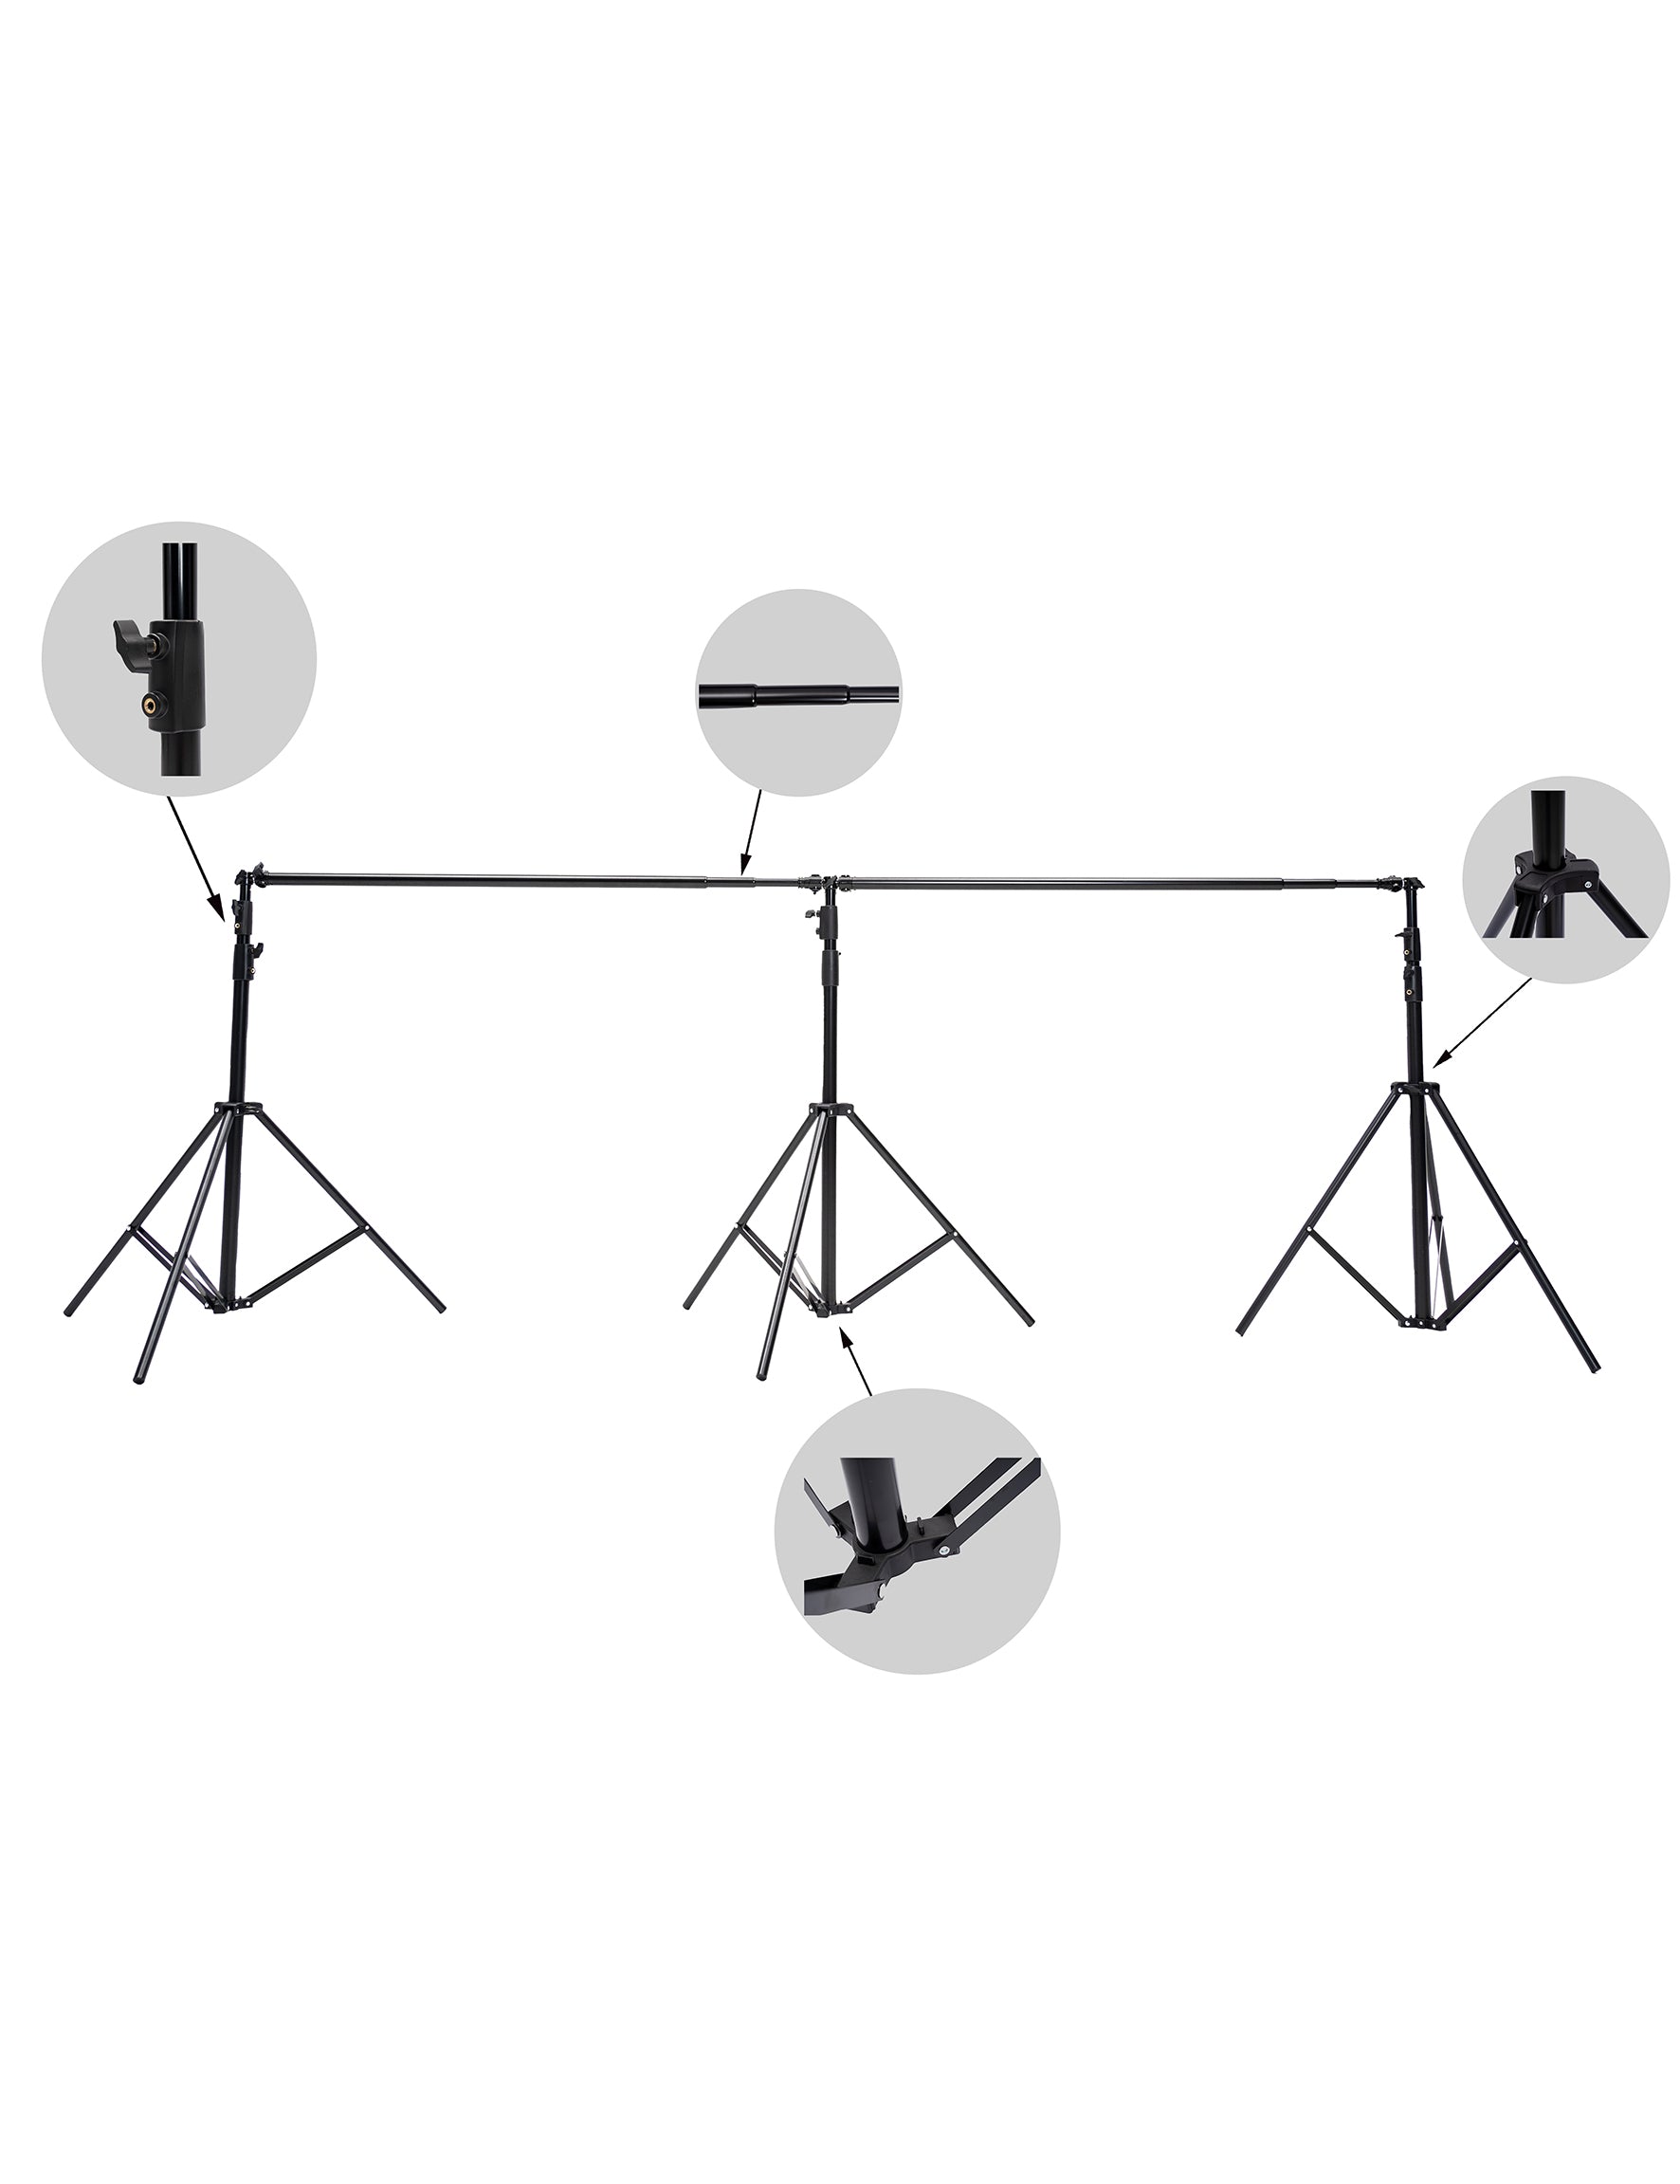 Kate 6x3m Frame Stand for room set( including 8 clips + one carrying case)